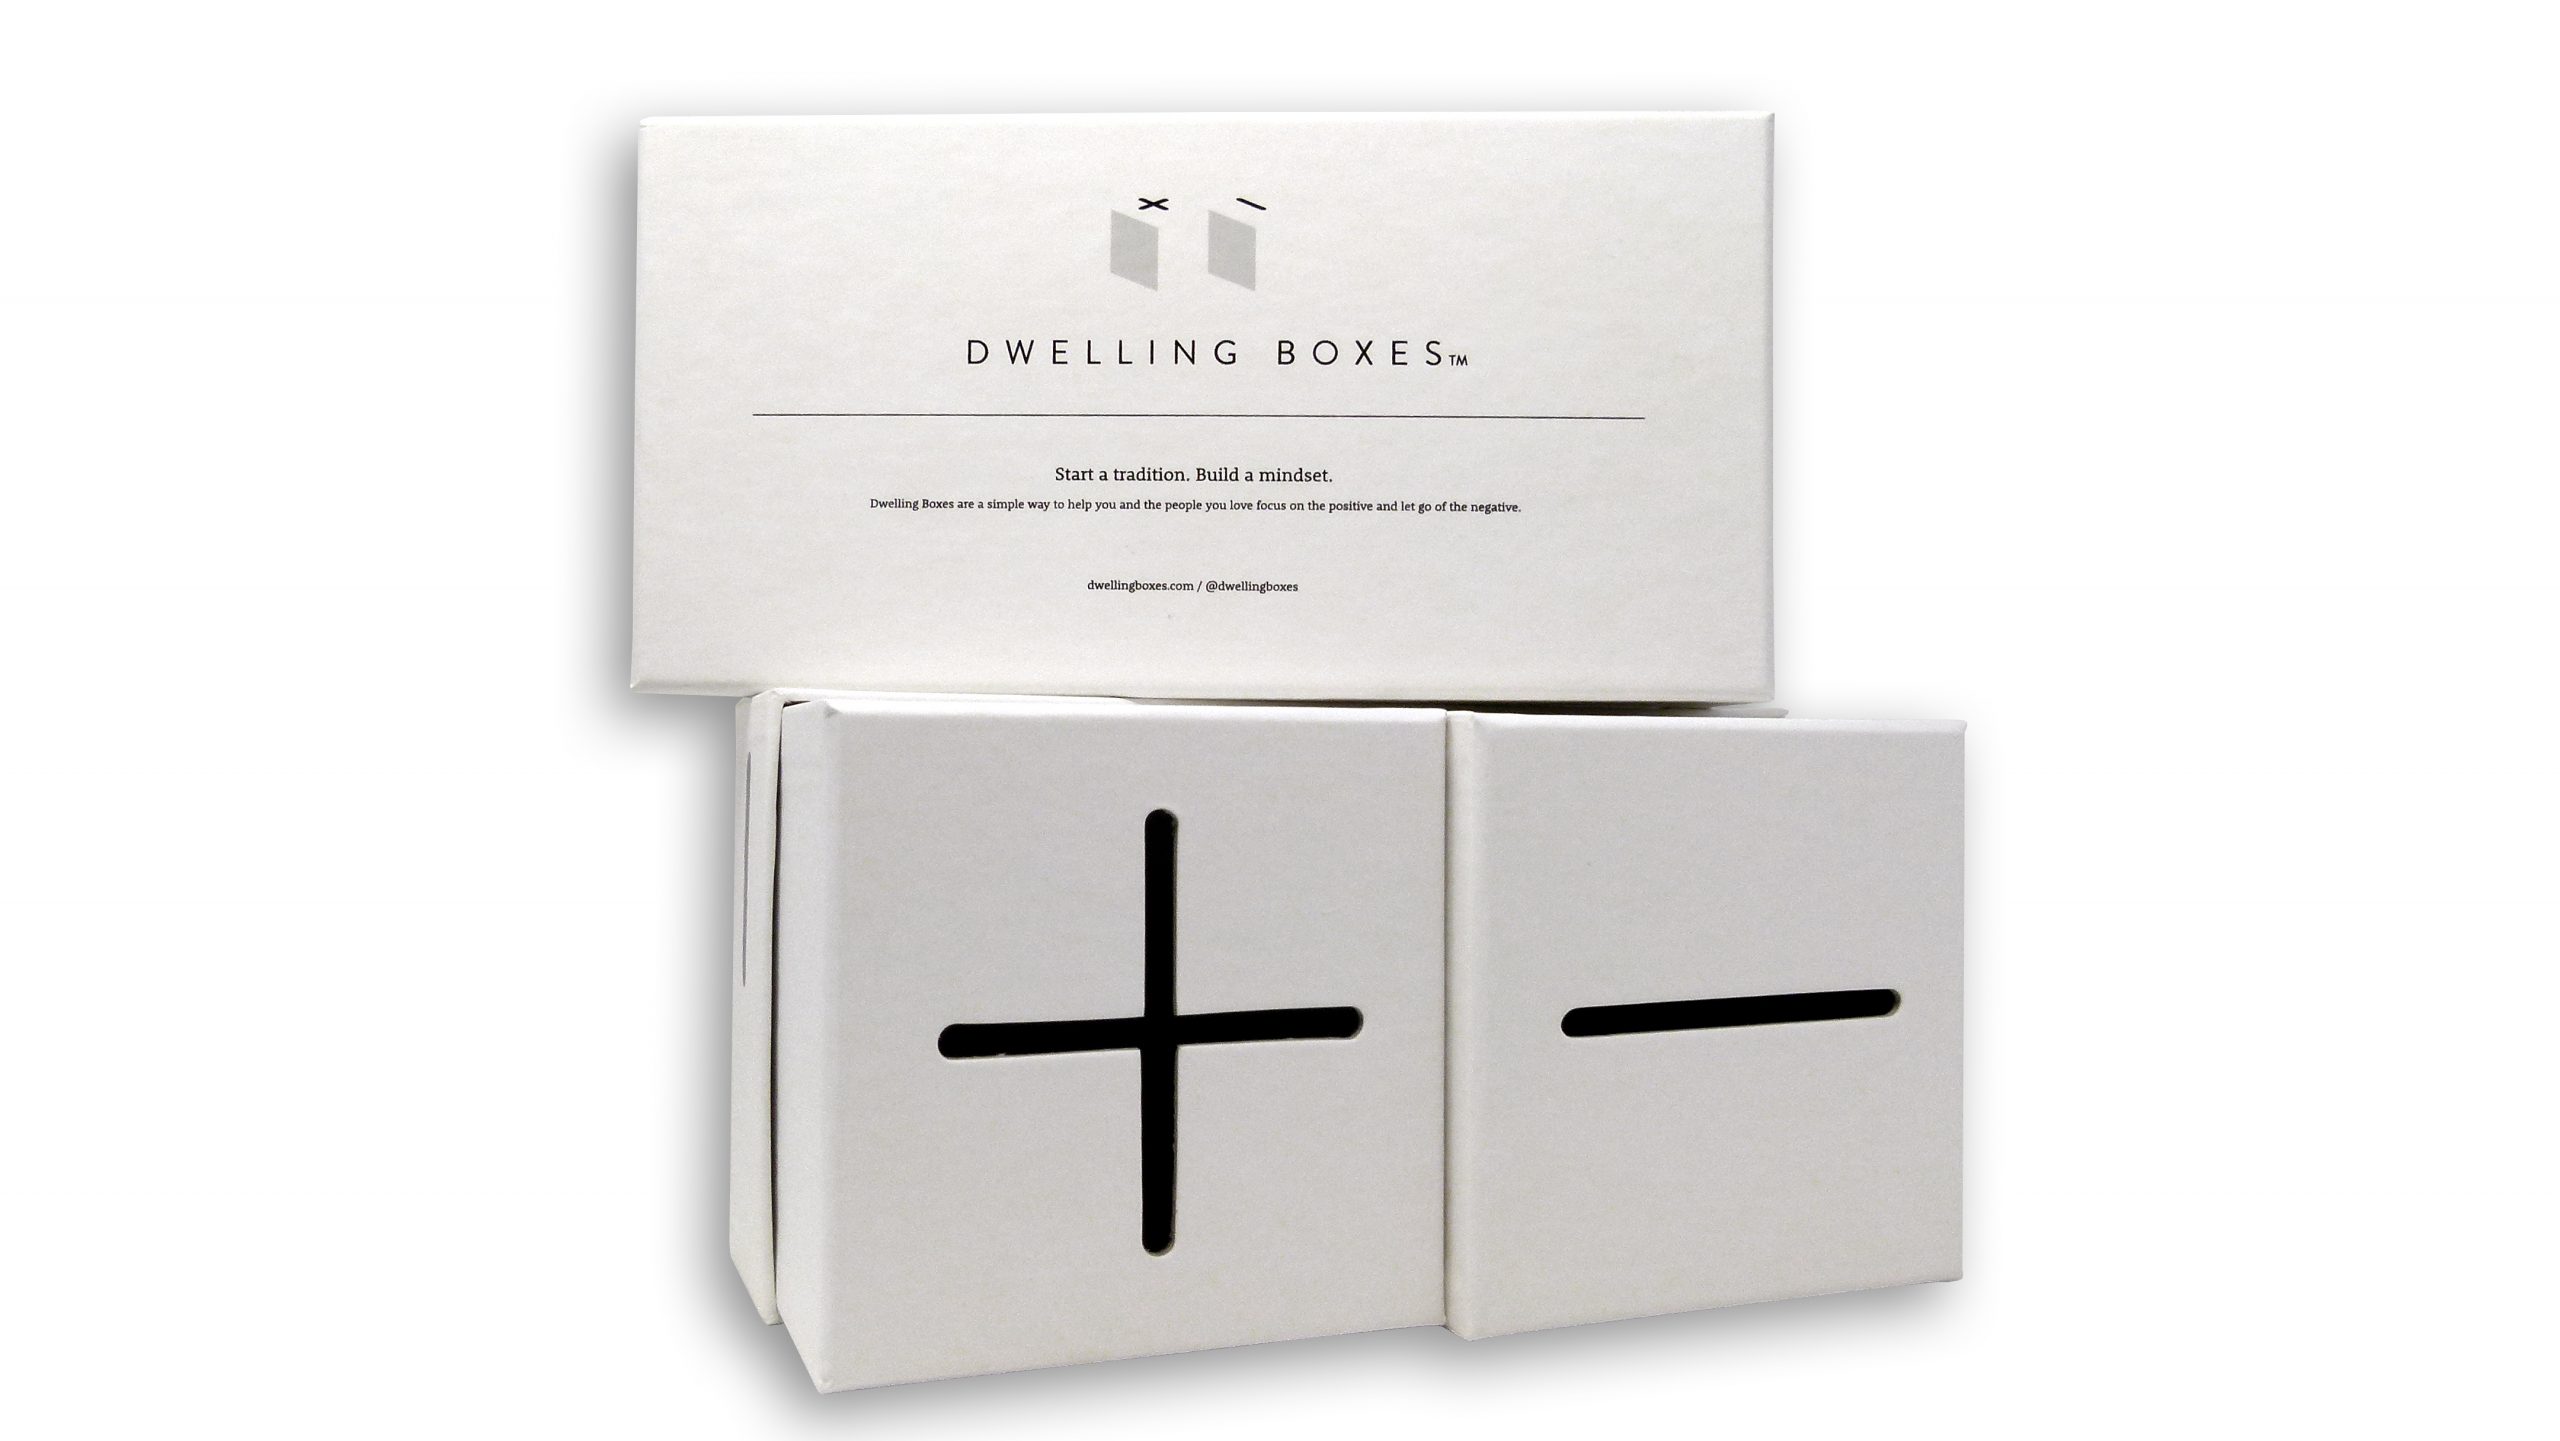 Dwelling Boxes Packaging - PaperSpecs